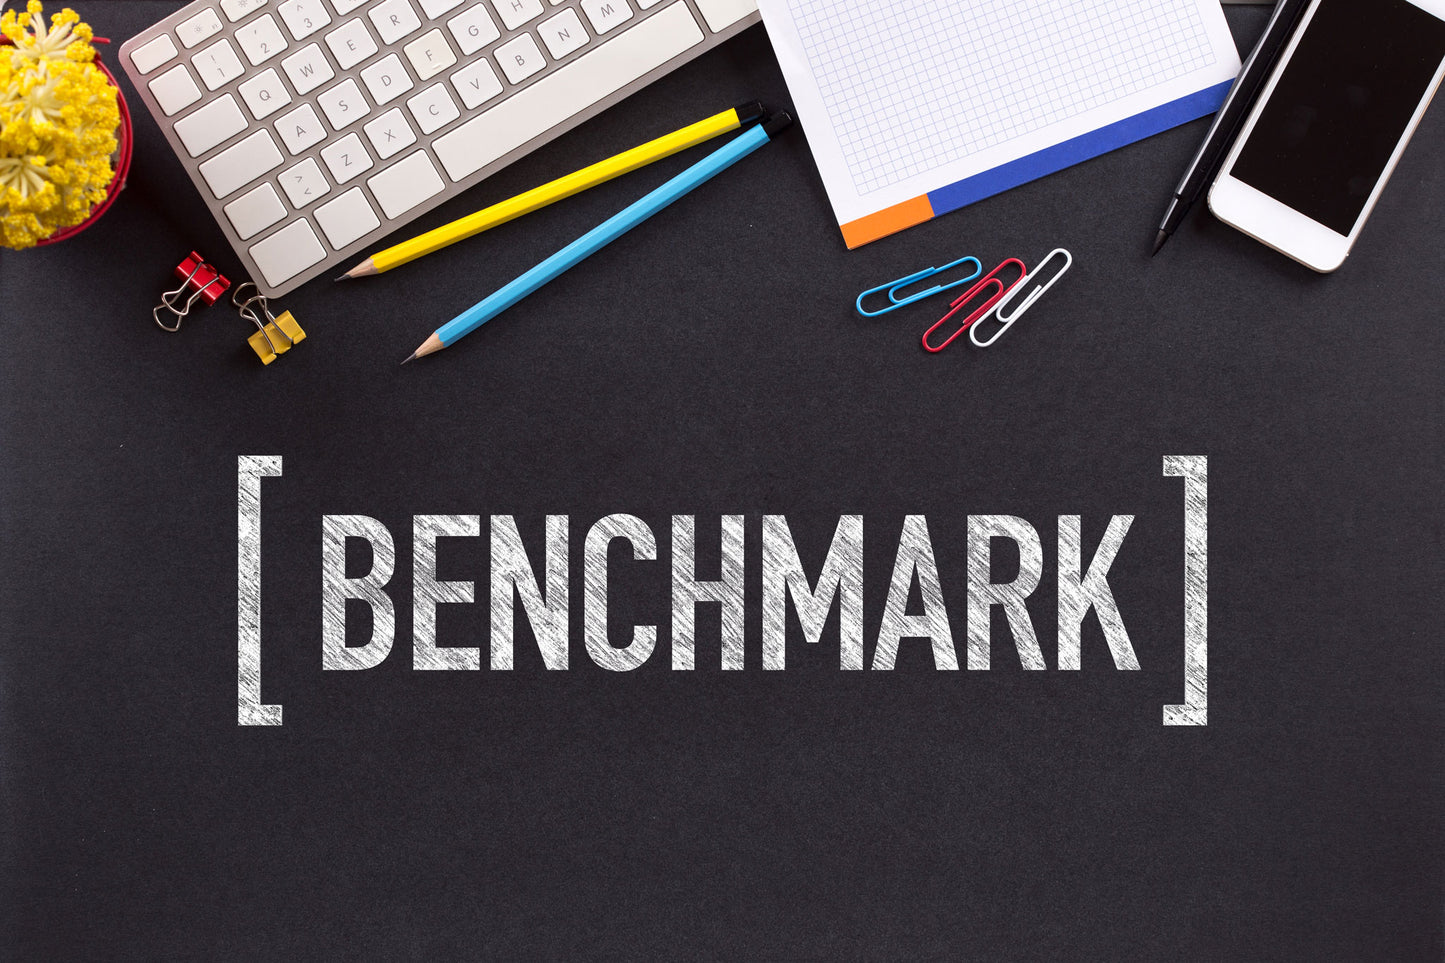 BENCHMARK & INTERVIEW PROCESS